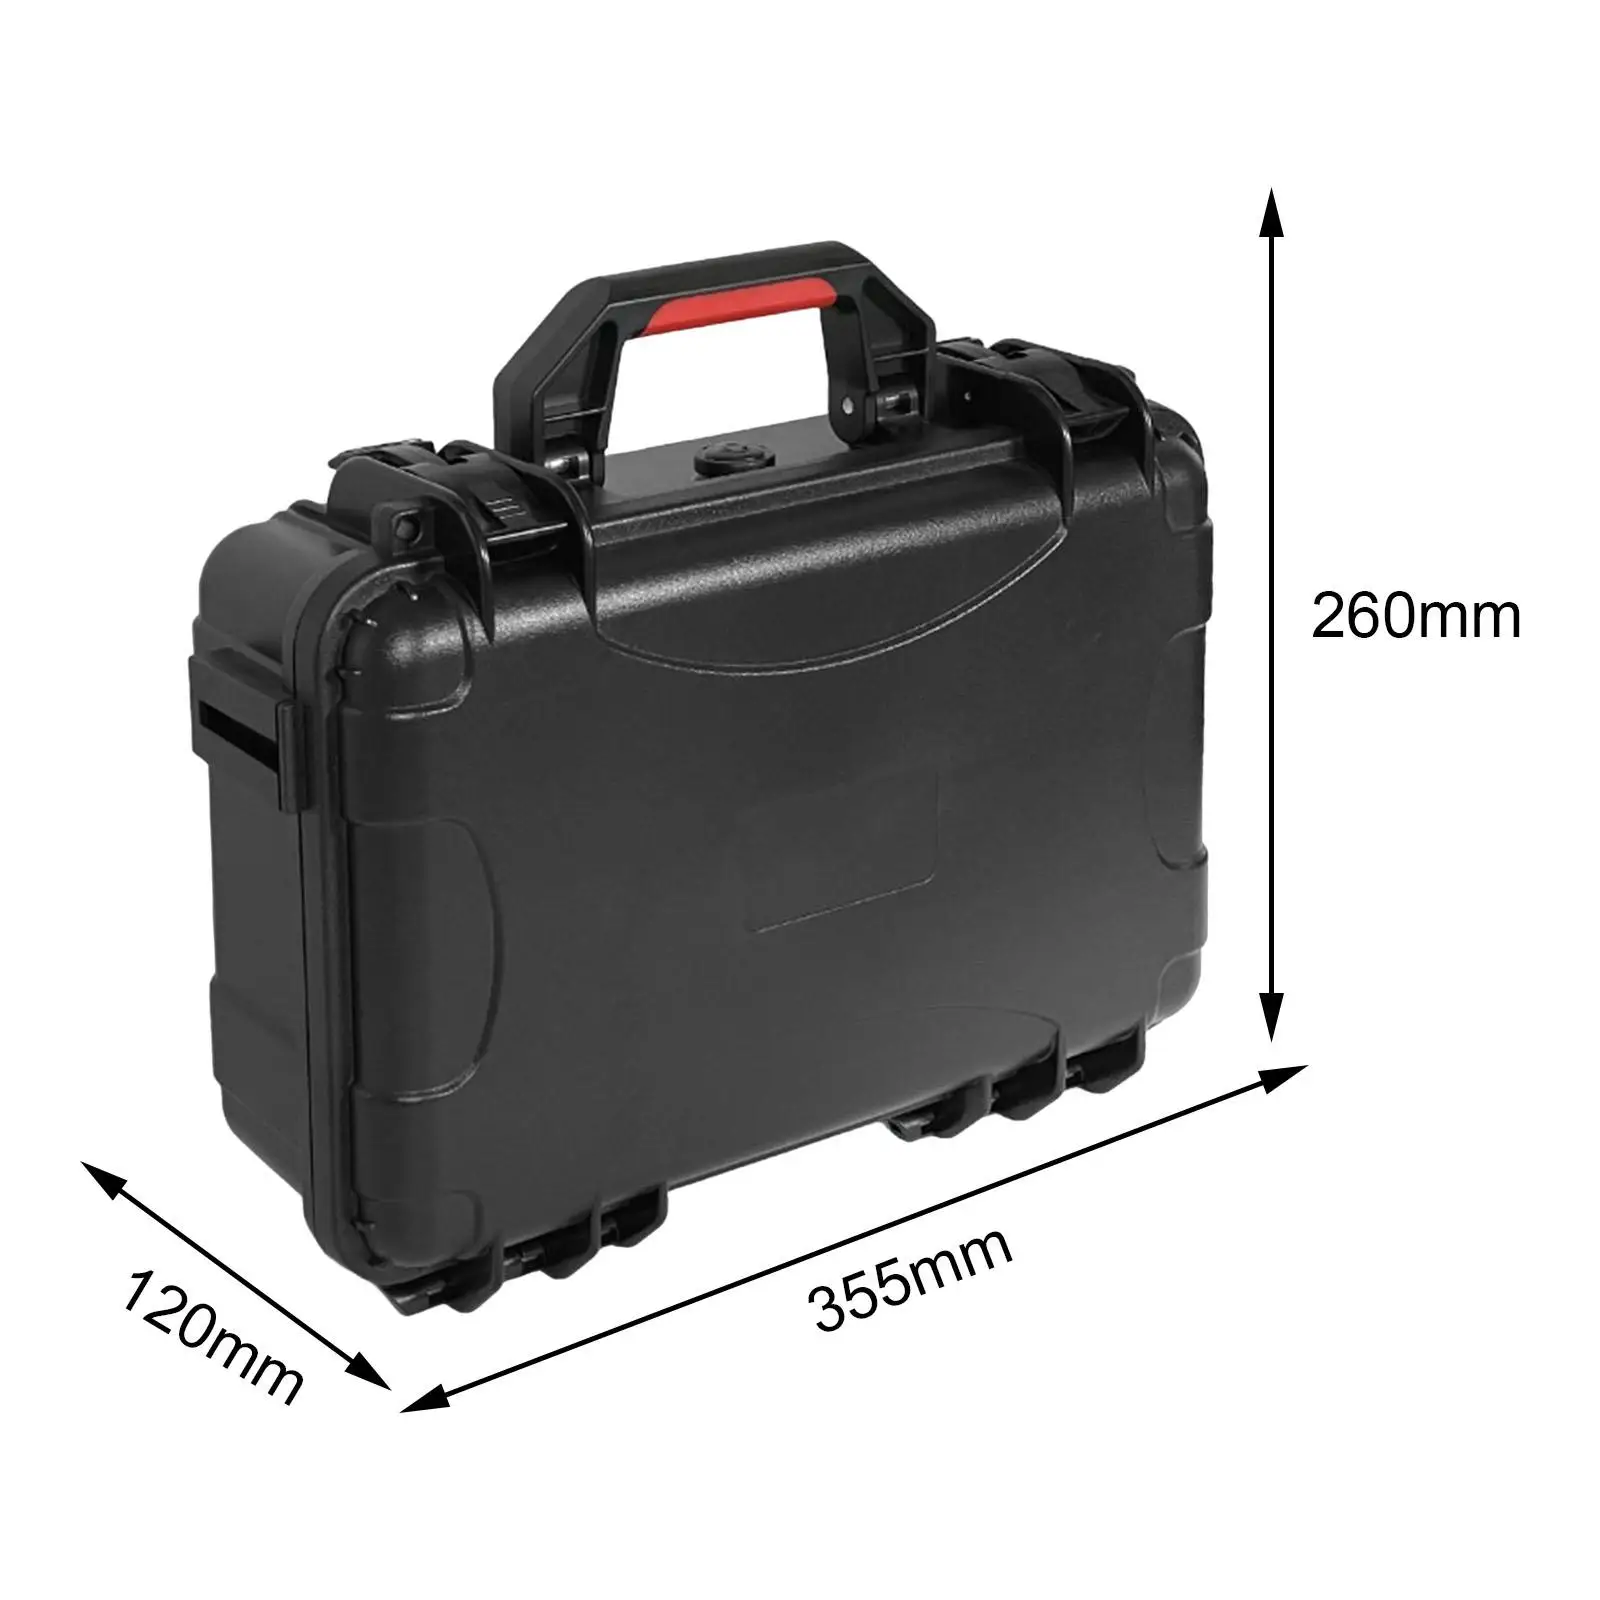 Travel Hard Shell Case Protective Waterproof Hard Case Drone Body Carrying Case for Scientific Exploration Accessories